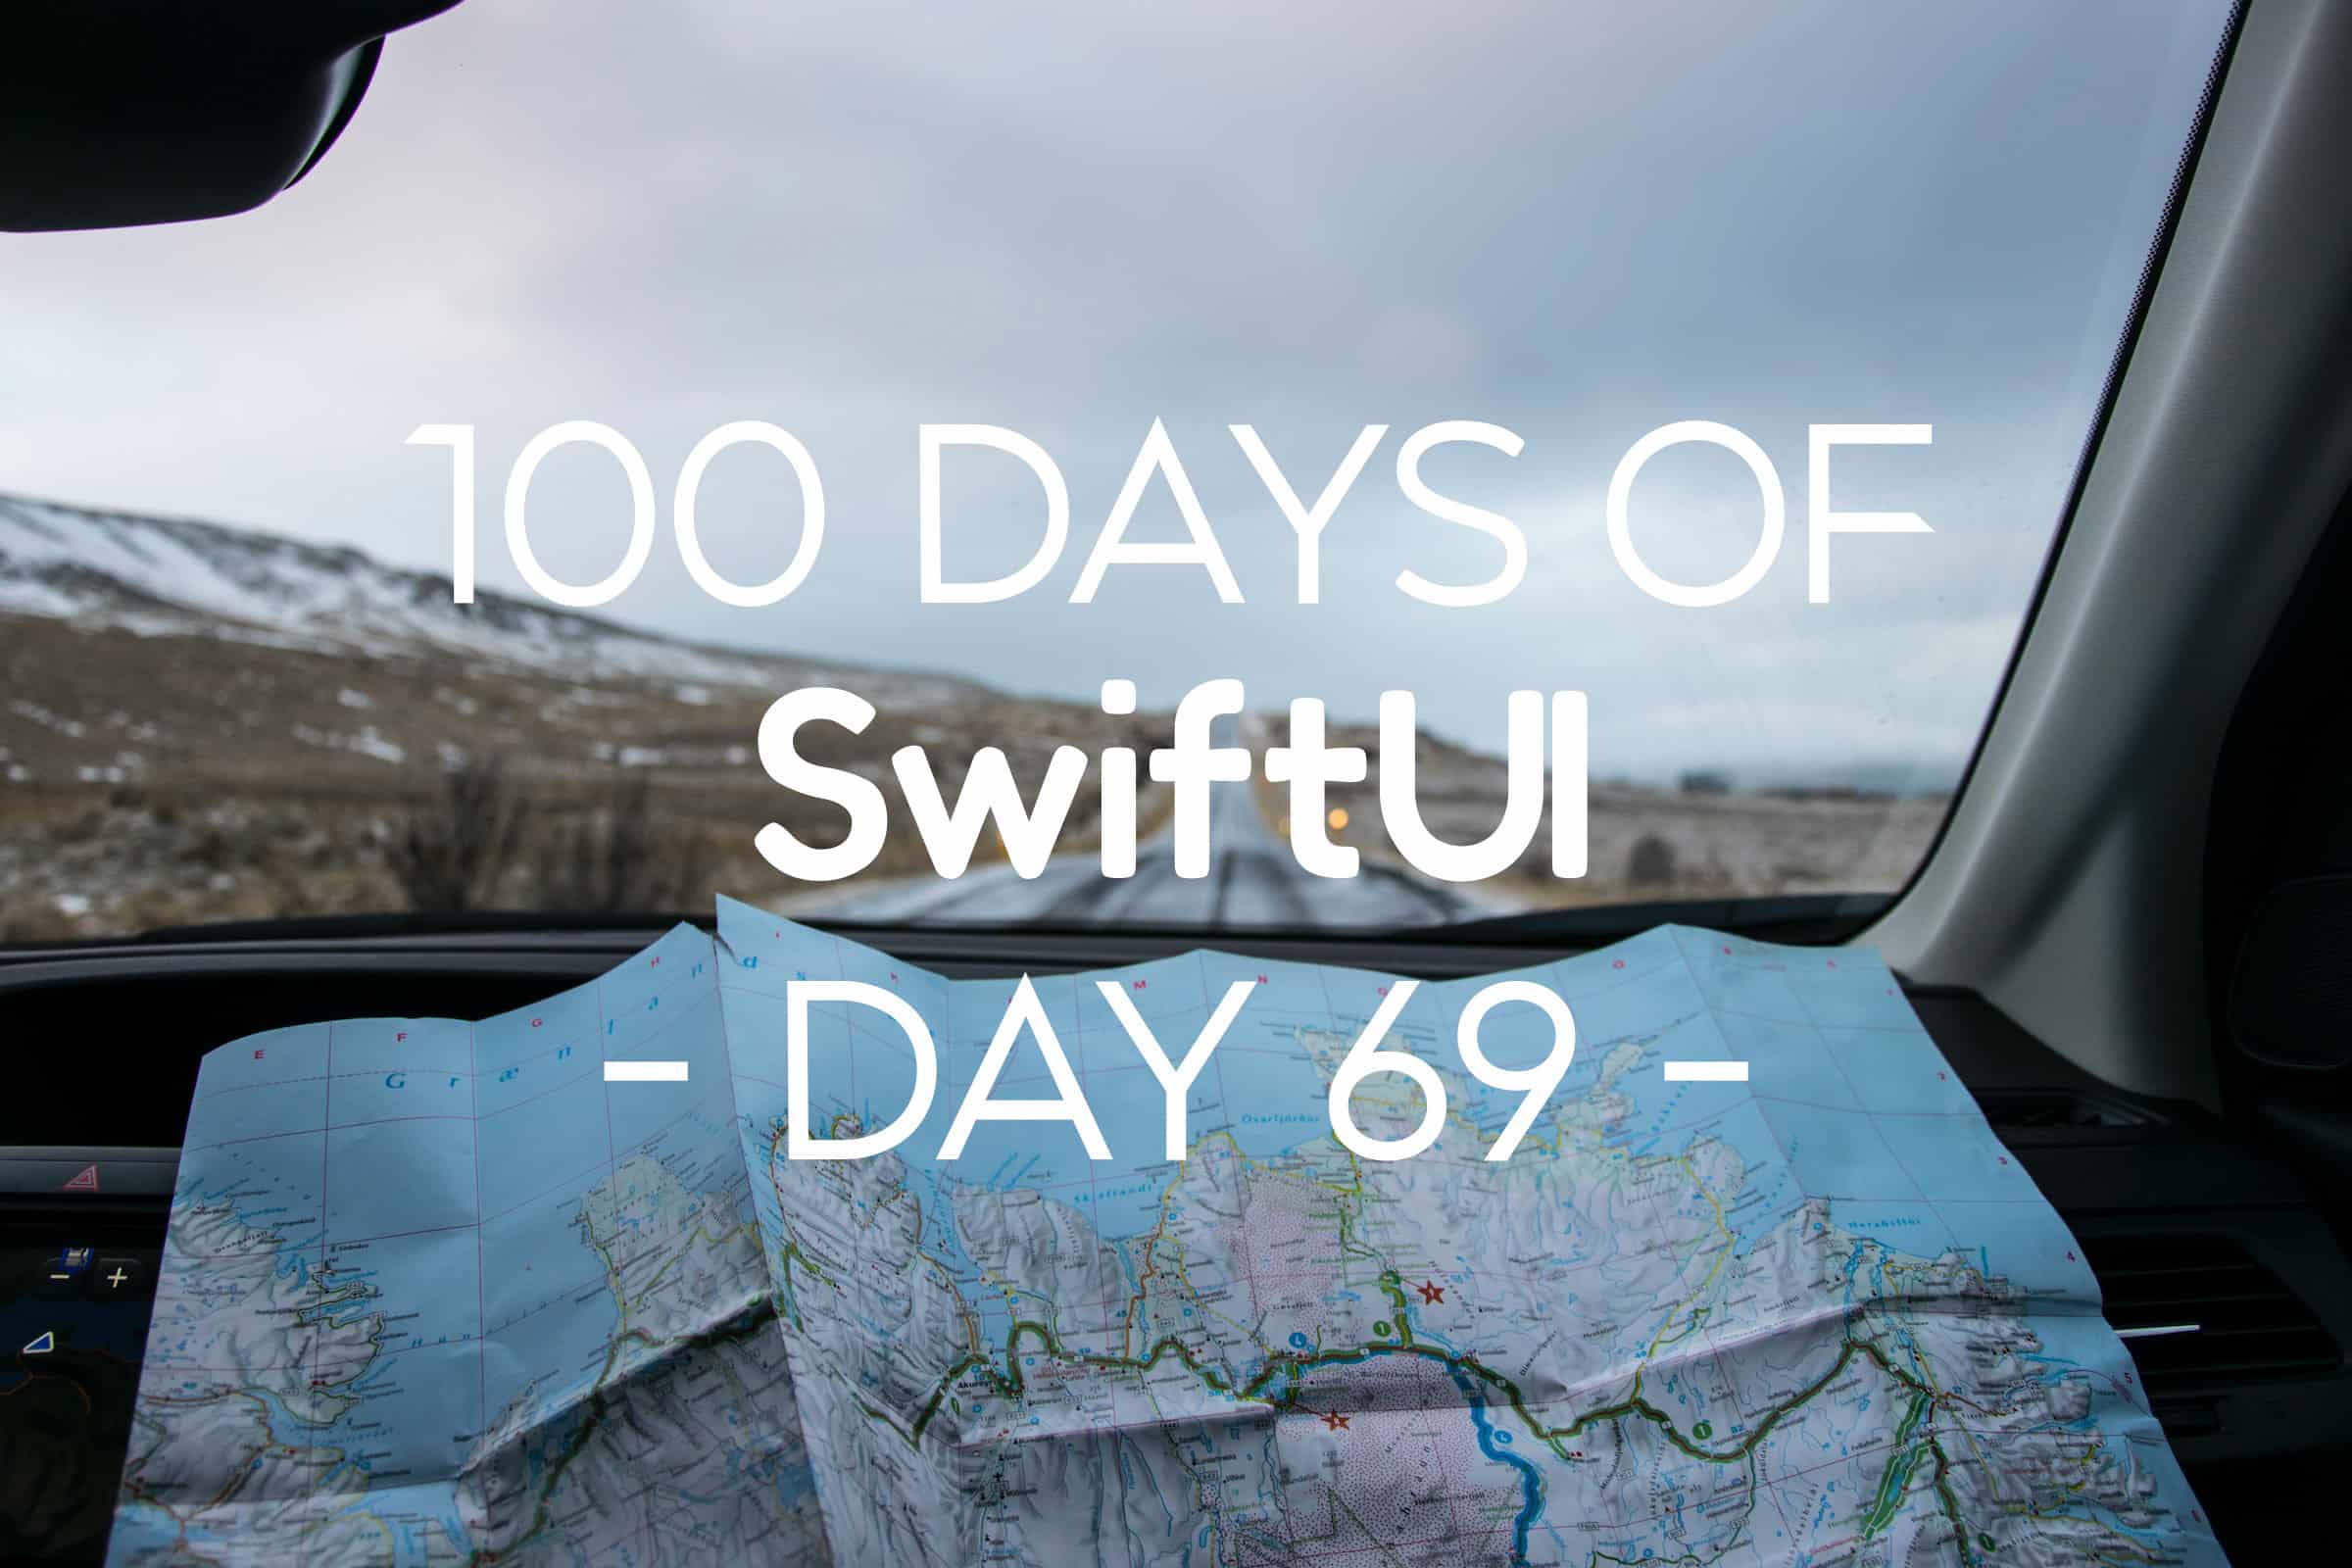 100 Days of SwiftUI Day 69